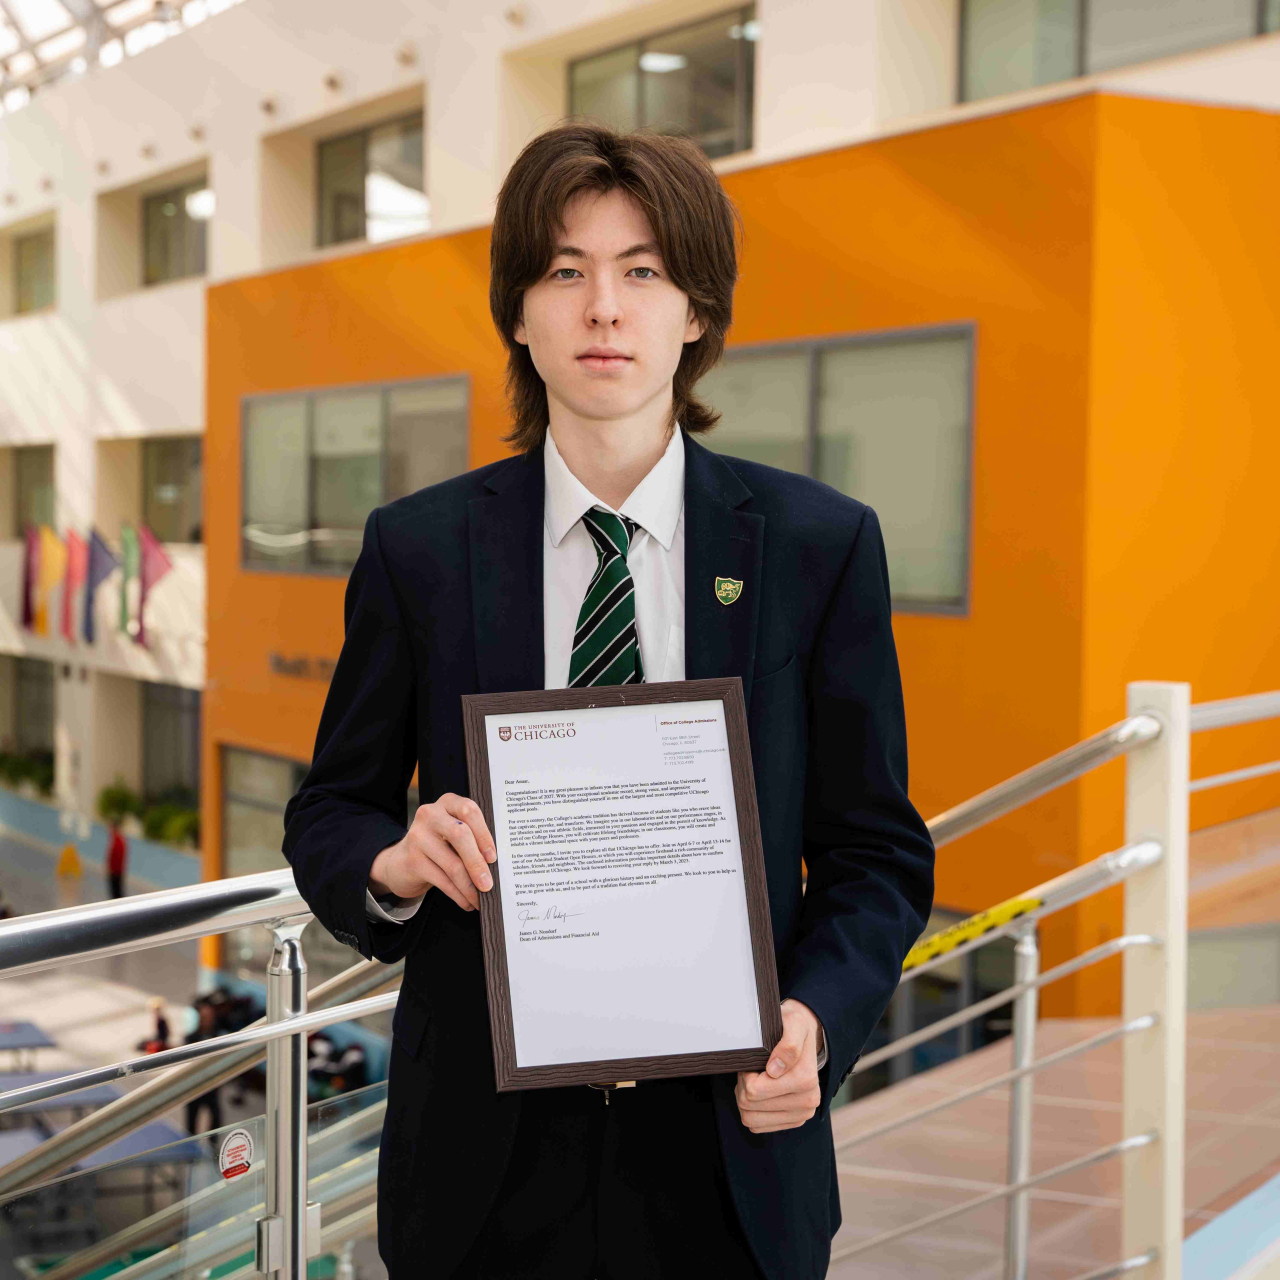 Haileybury Almaty Leaver Secures Prestigious Economics Offers from UChicago and UCL